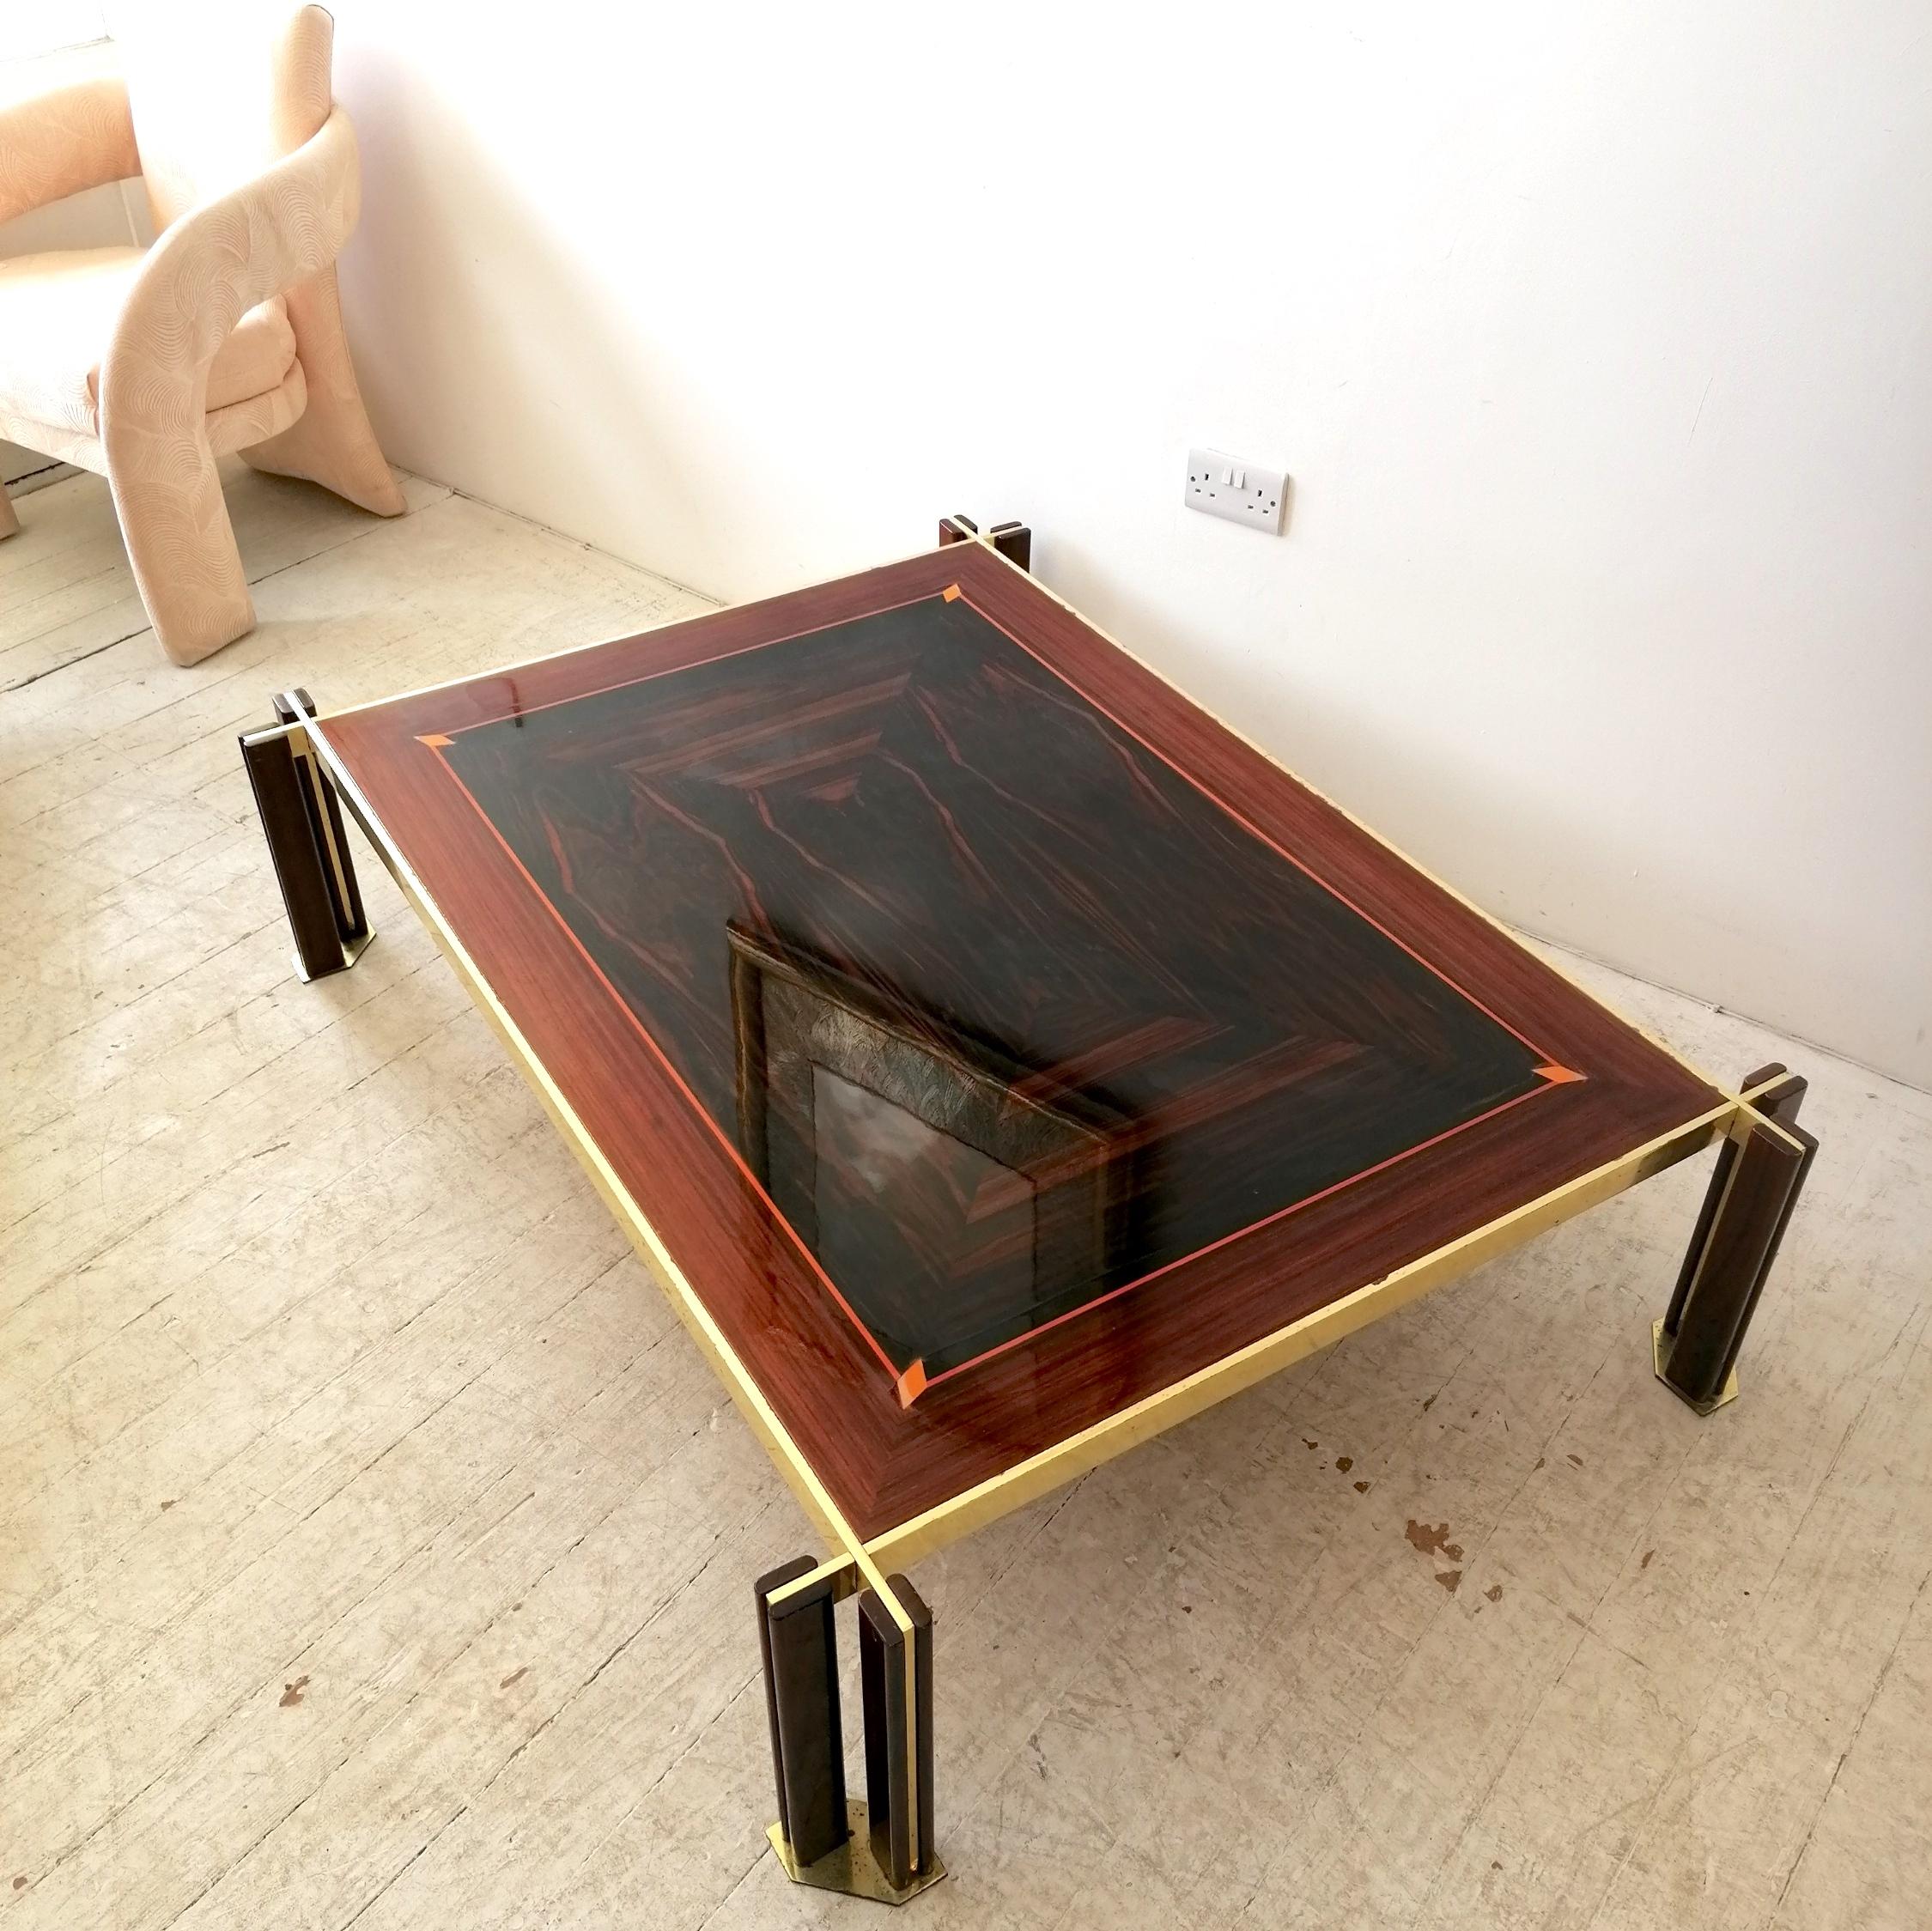 Rare large vintage mid century coffee table by Paolo Barracchia for Roman Deco S.P.A. Italy, 1970s...label is not present, but the table is well documented online. 
Cruciform base in gilt brass. The glossy lacquered marquetry top is made from